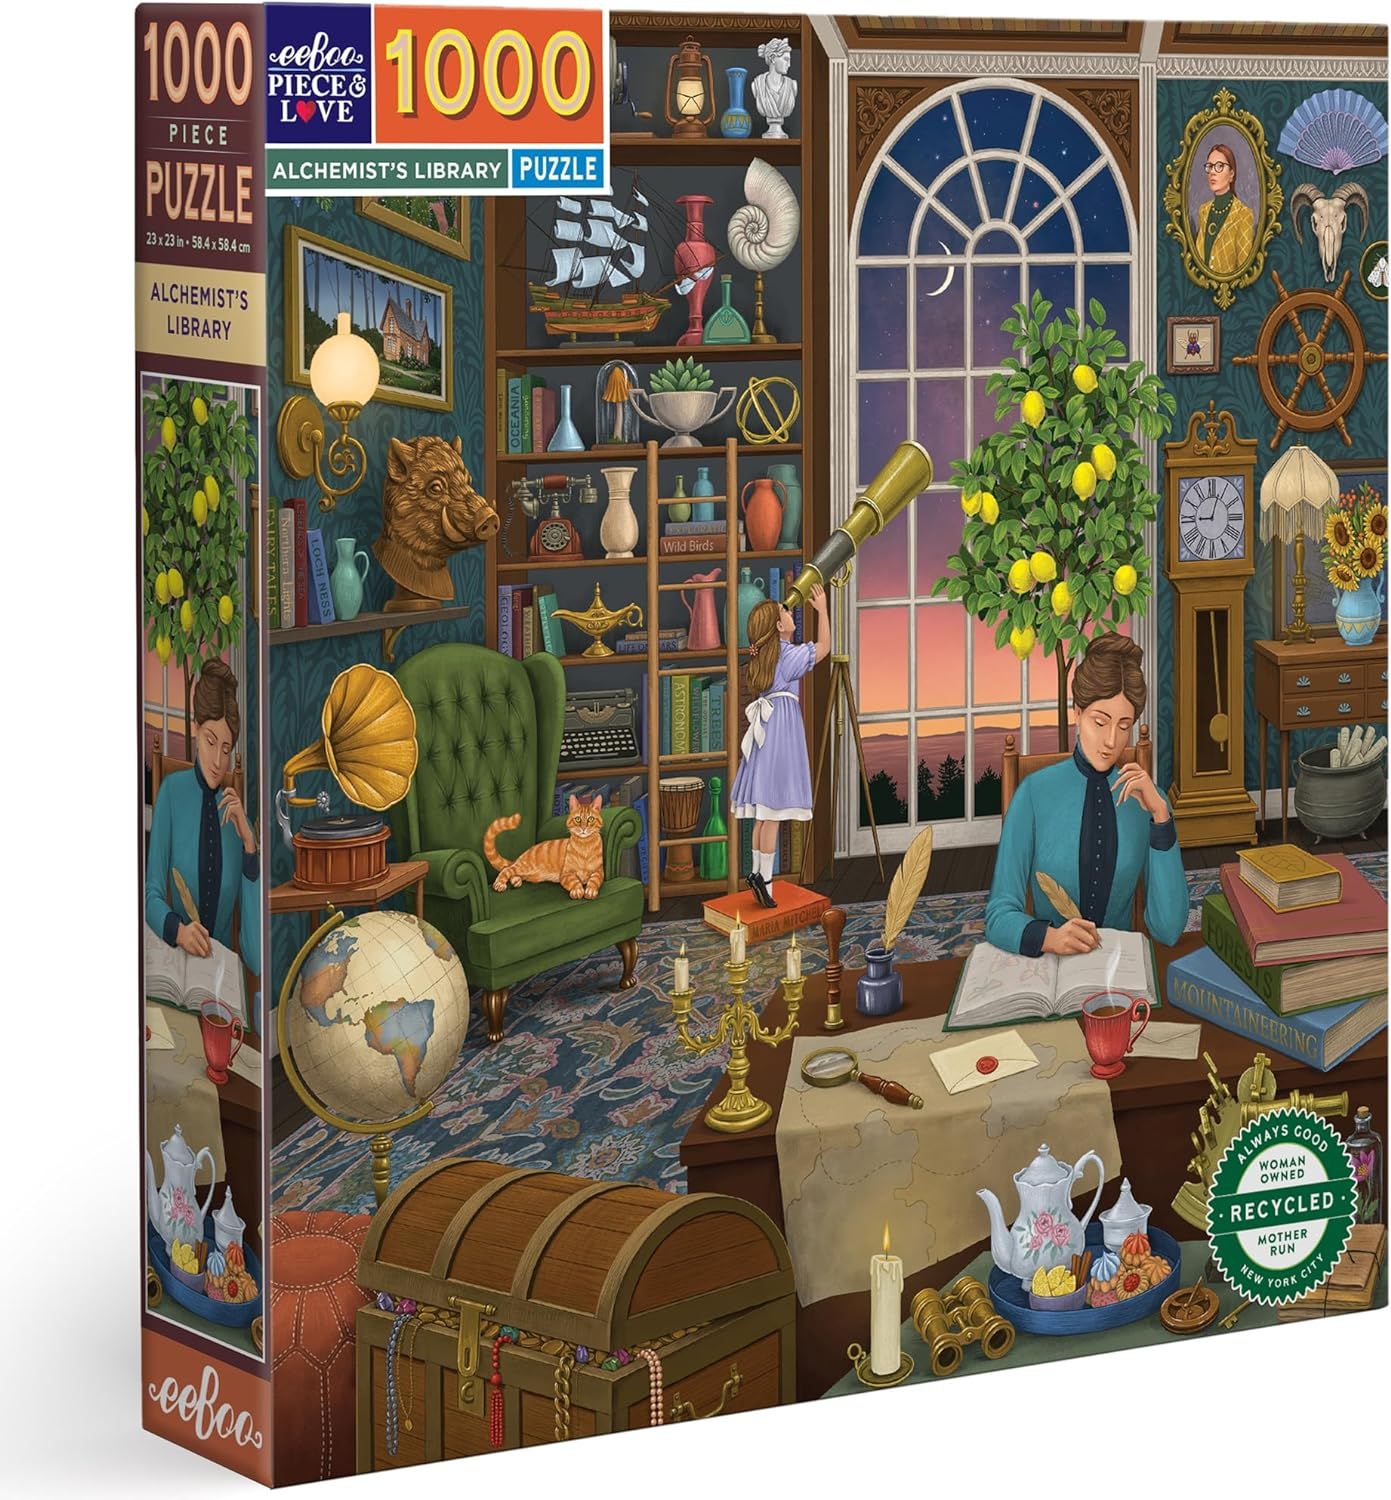 Image of the alchemist's library puzzle